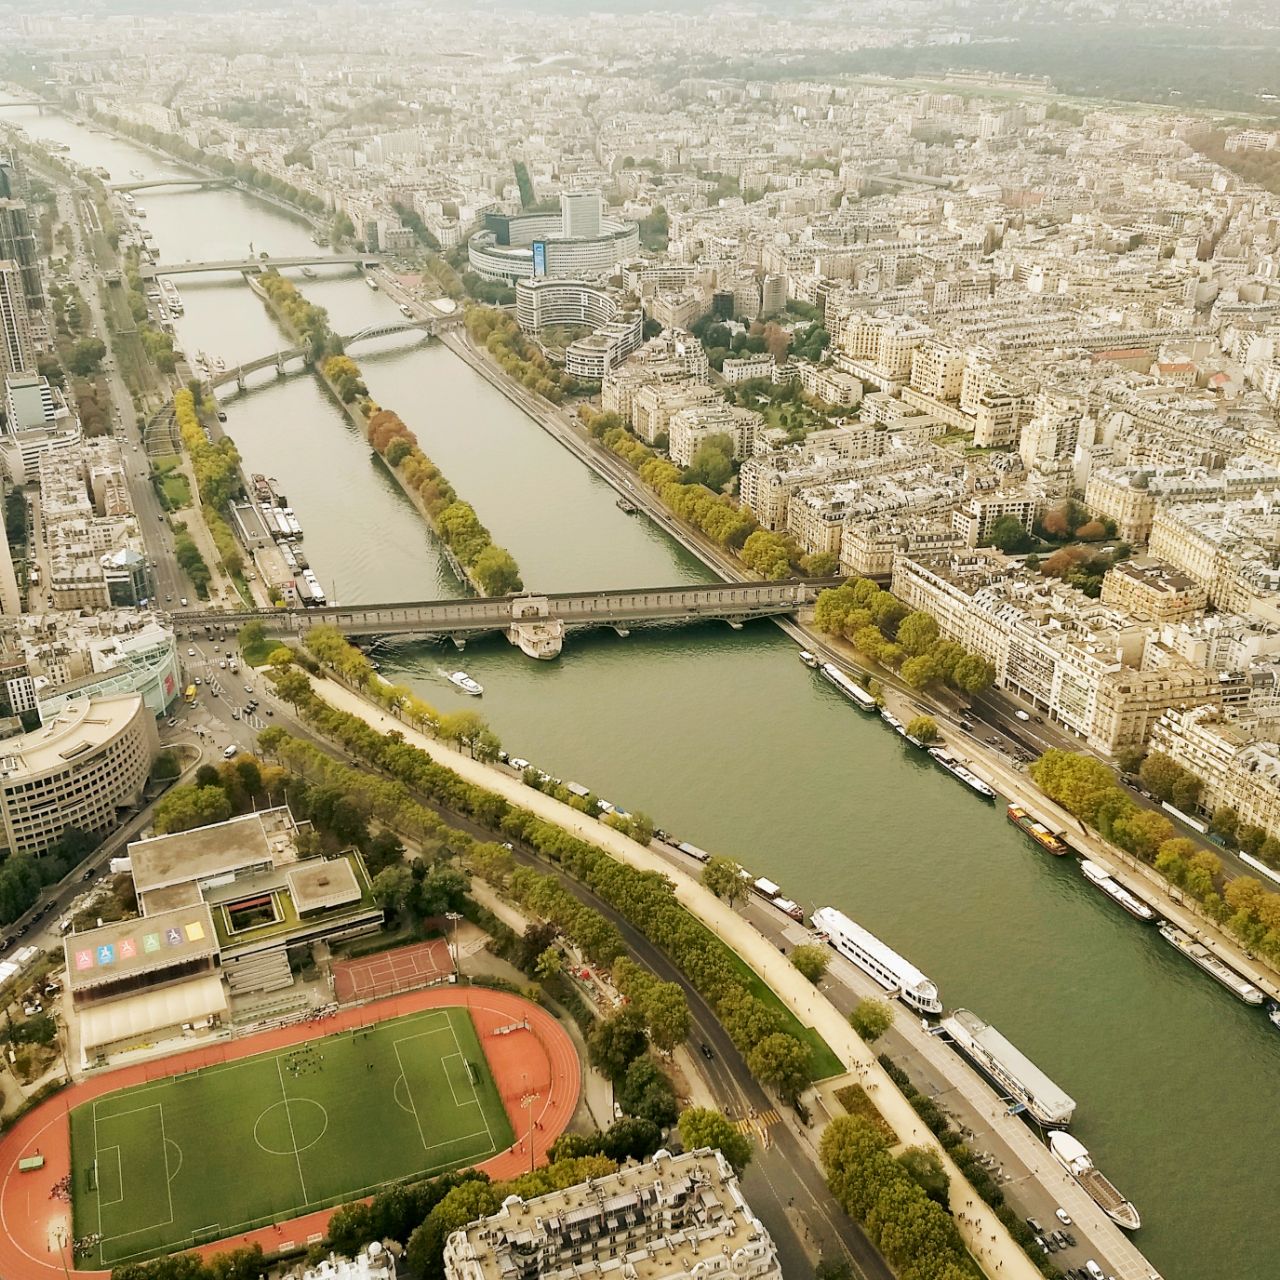 things to do in Paris